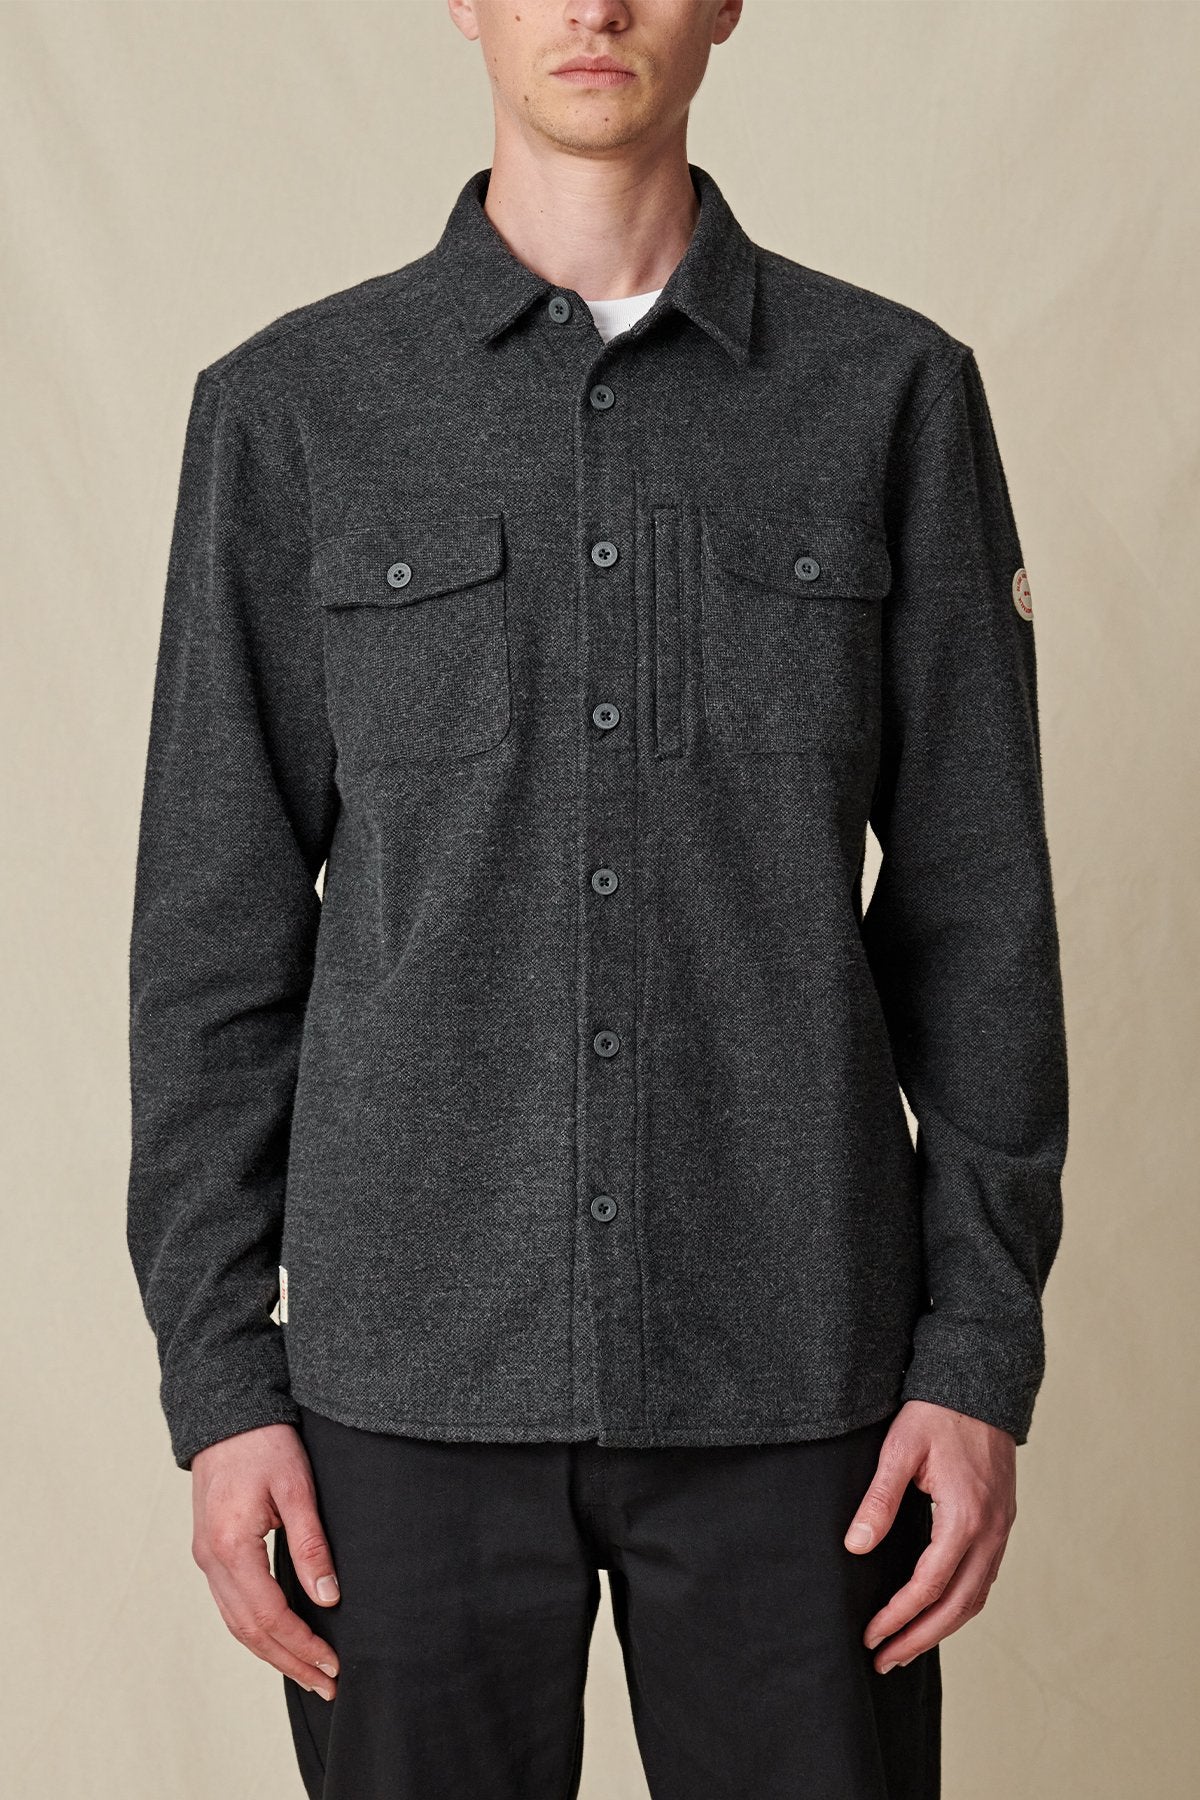 Globe Shirts - Wanderer Shacket in colour Charcoal